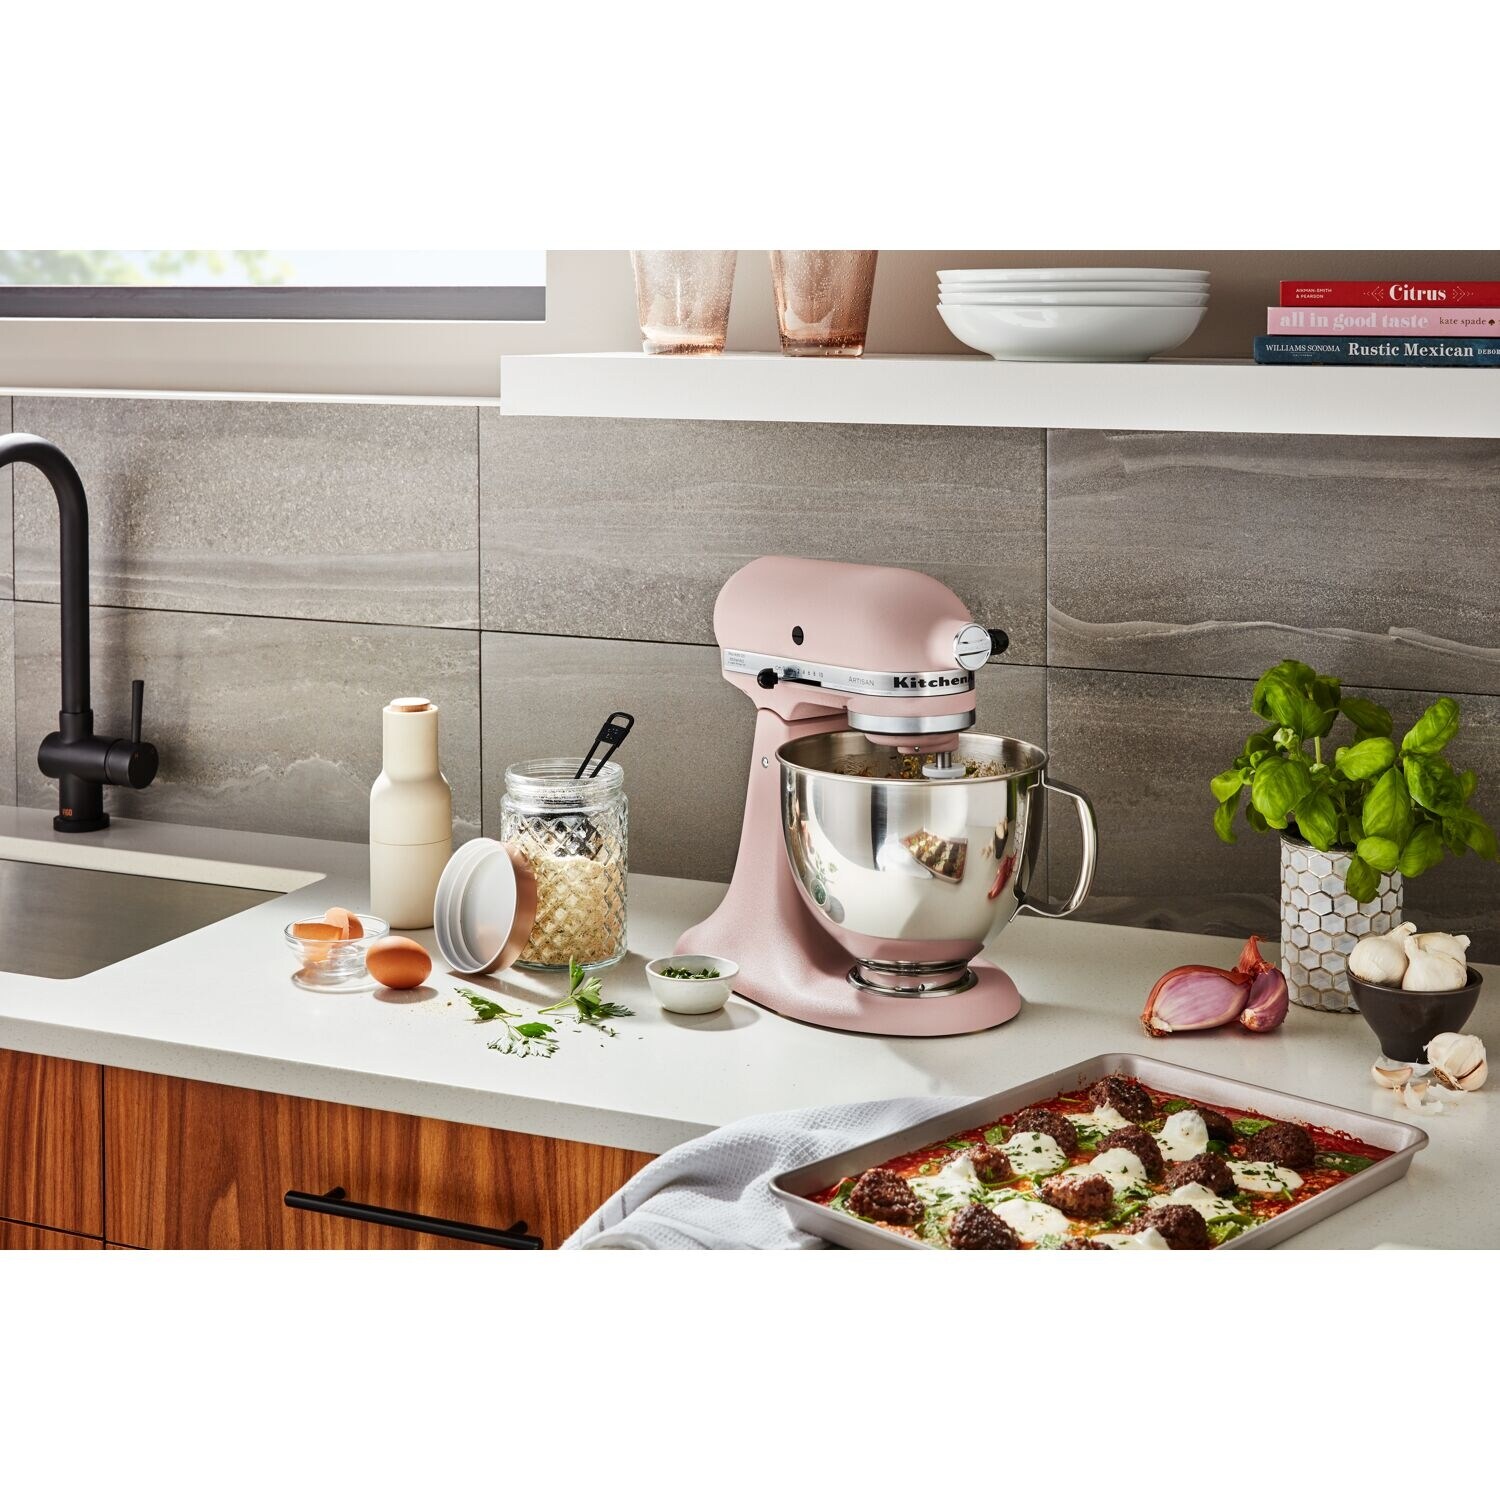 https://ak1.ostkcdn.com/images/products/is/images/direct/c7193483c1a7e47e594c3c3d7e2f1a86569c6b6c/KitchenAid-Artisan-Series-325-Watt-Tilt-Back-Head-Stand-Mixer-in-Feather-Pink.jpg